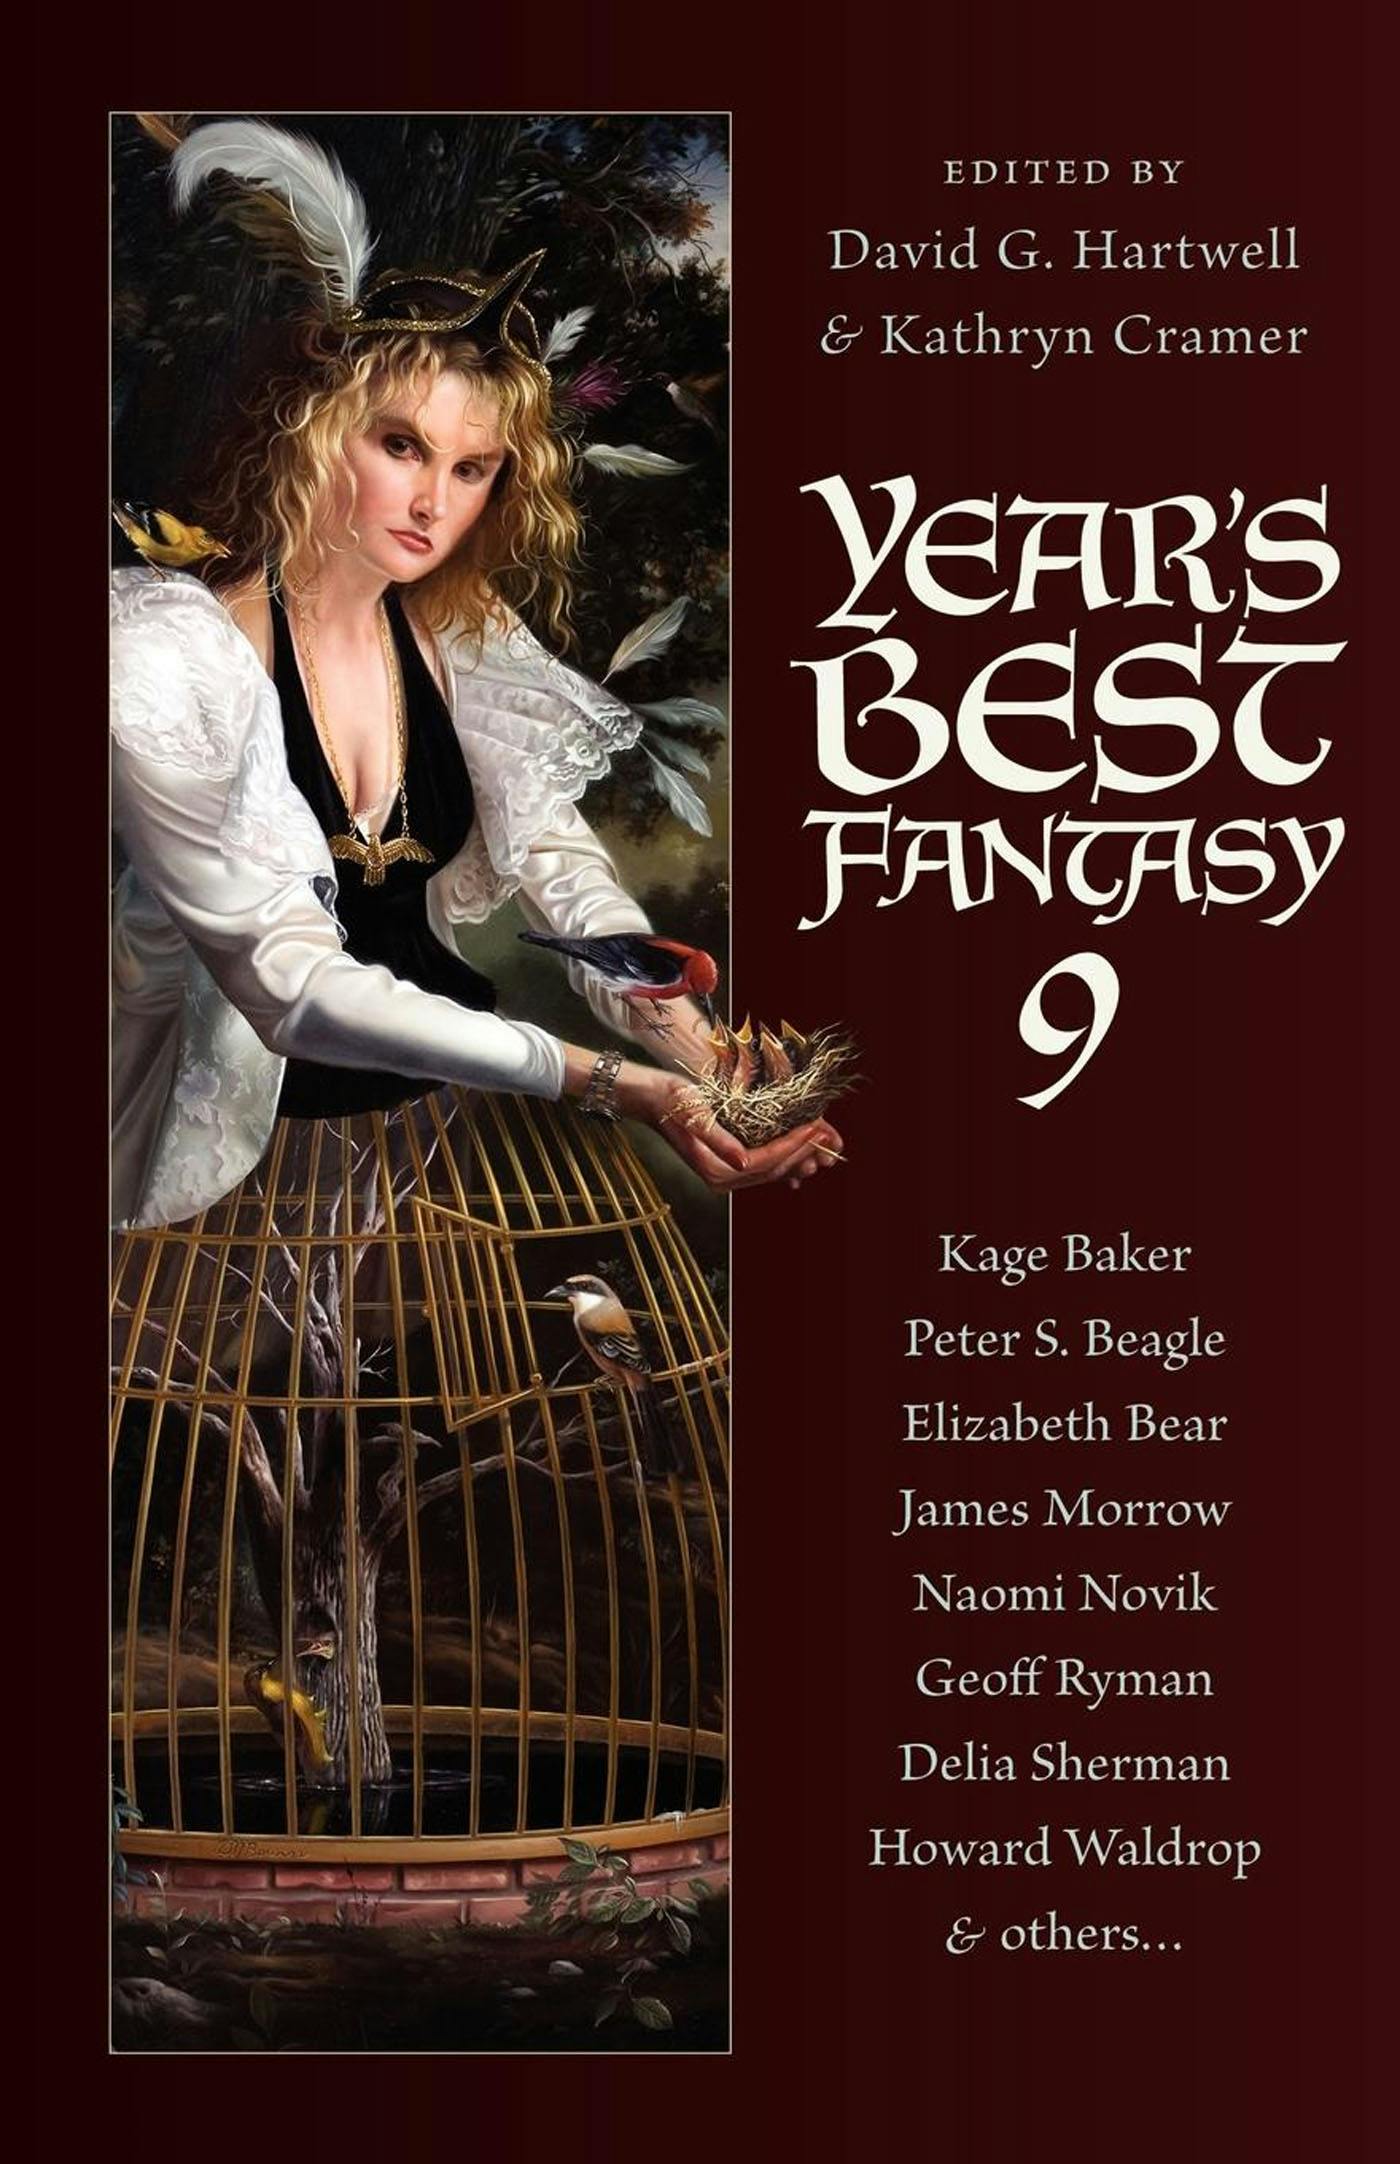 Cover for the book titled as: Year's Best Fantasy 9